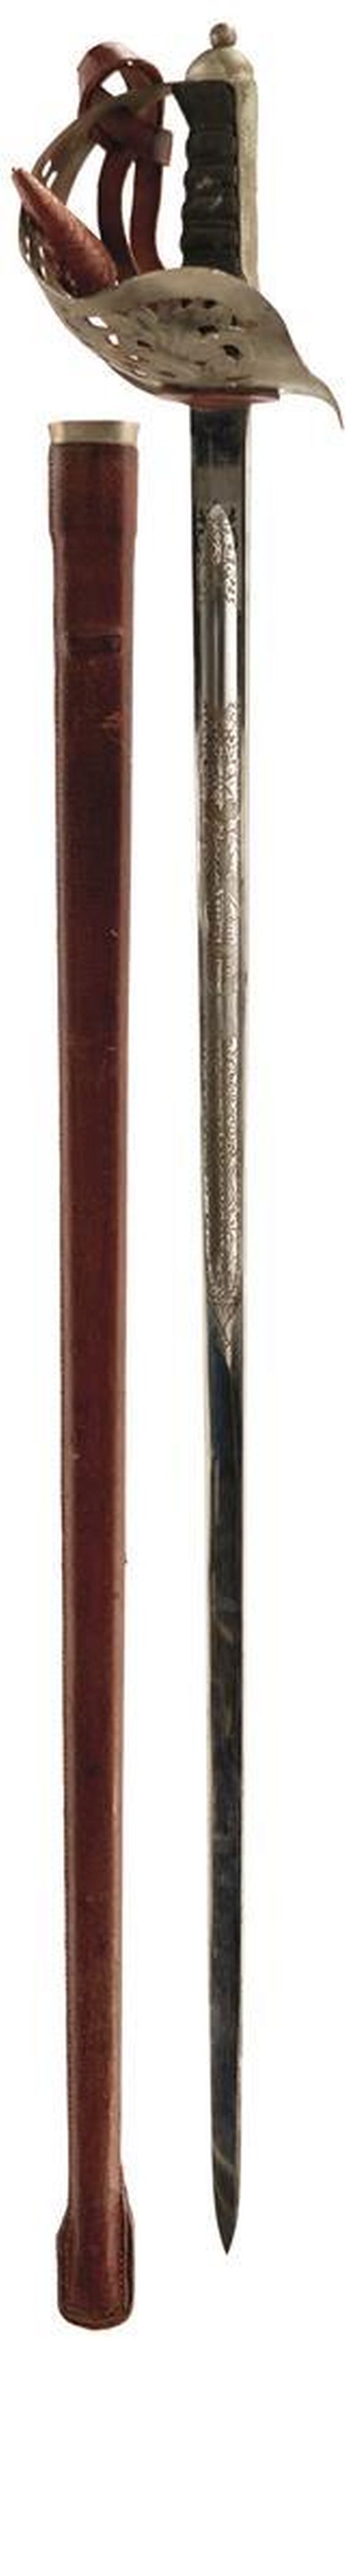 AN 1897 PATTERN INFANTRY OFFICER'S SWORD, 83.5cm clean blade etched with scrolling foliage,